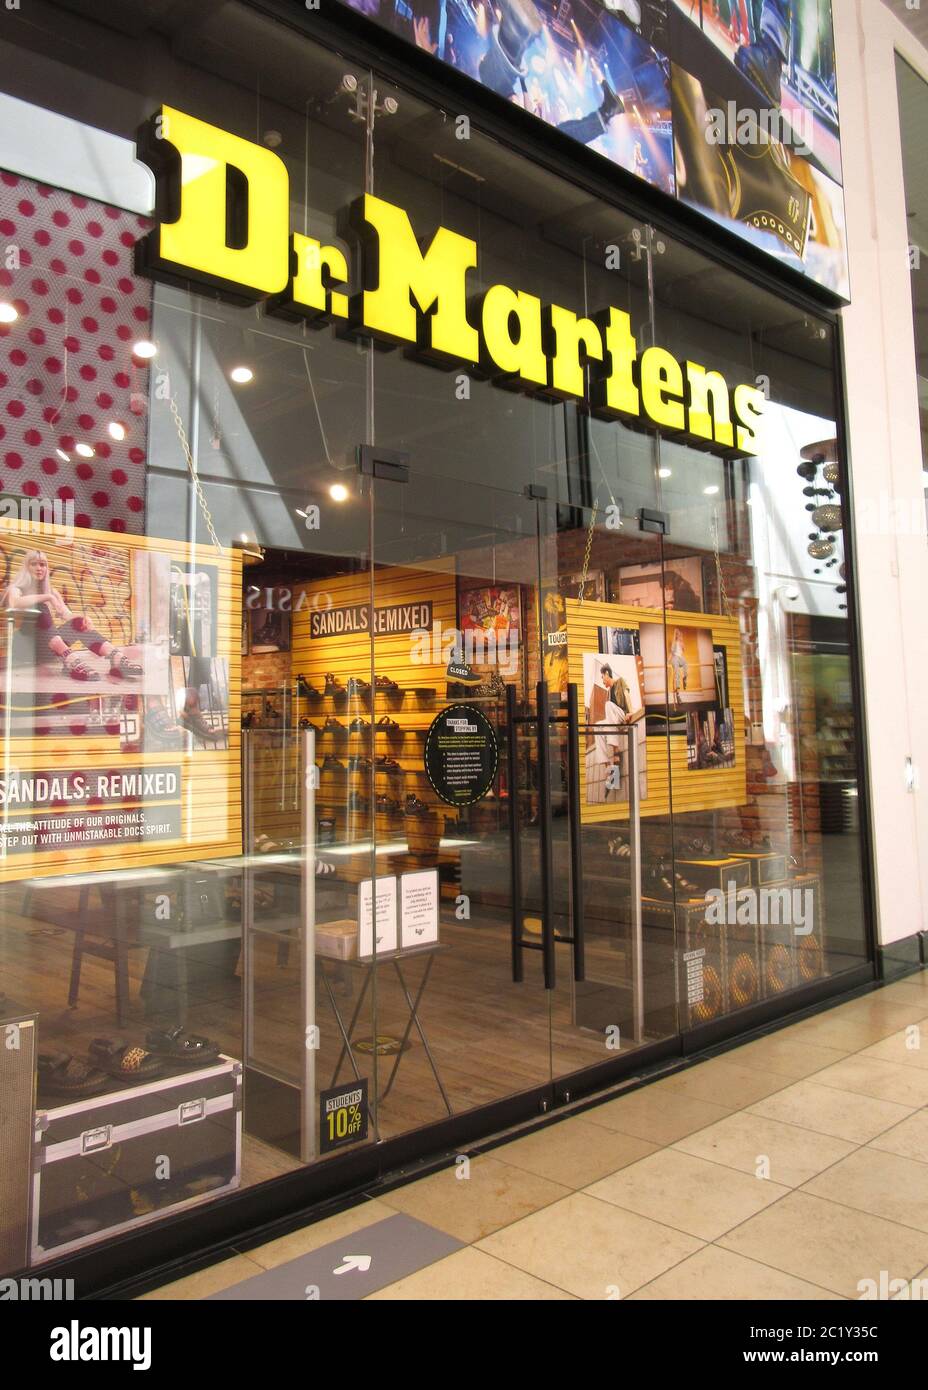 Dr martens logo hi-res stock photography and images - Alamy